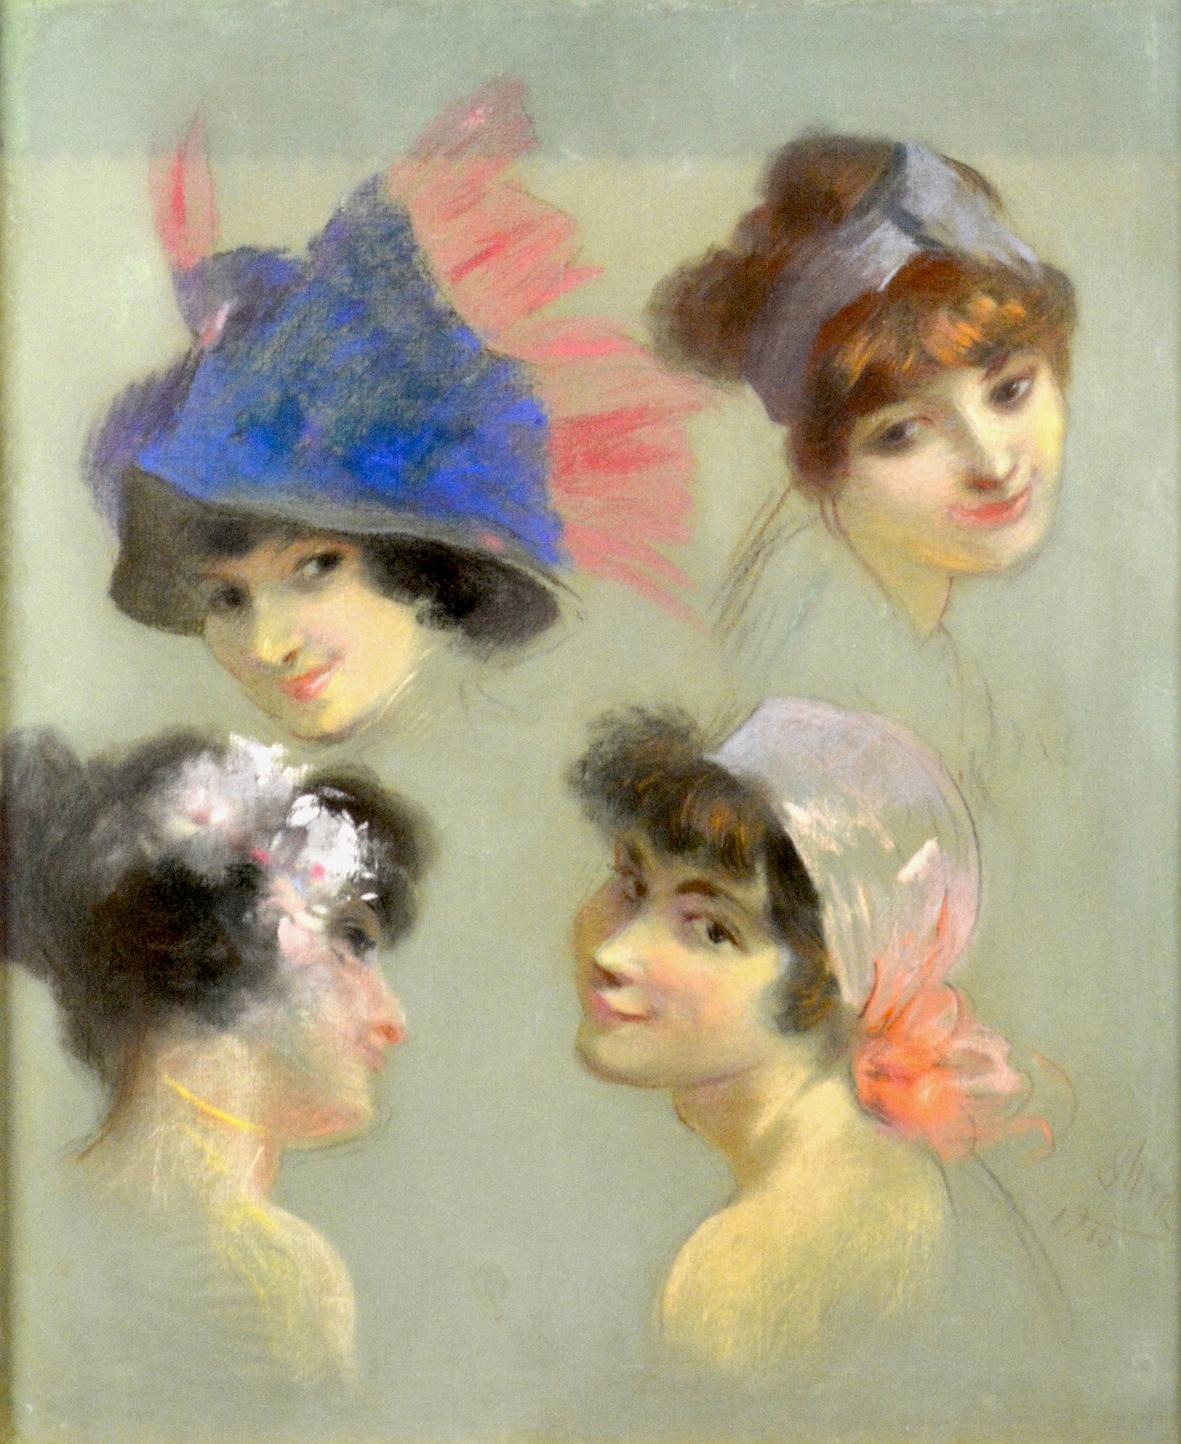 Original Pastel Painting of Four Females by Jules Cheret 1910 - Mixed Media Art by Jules Chéret